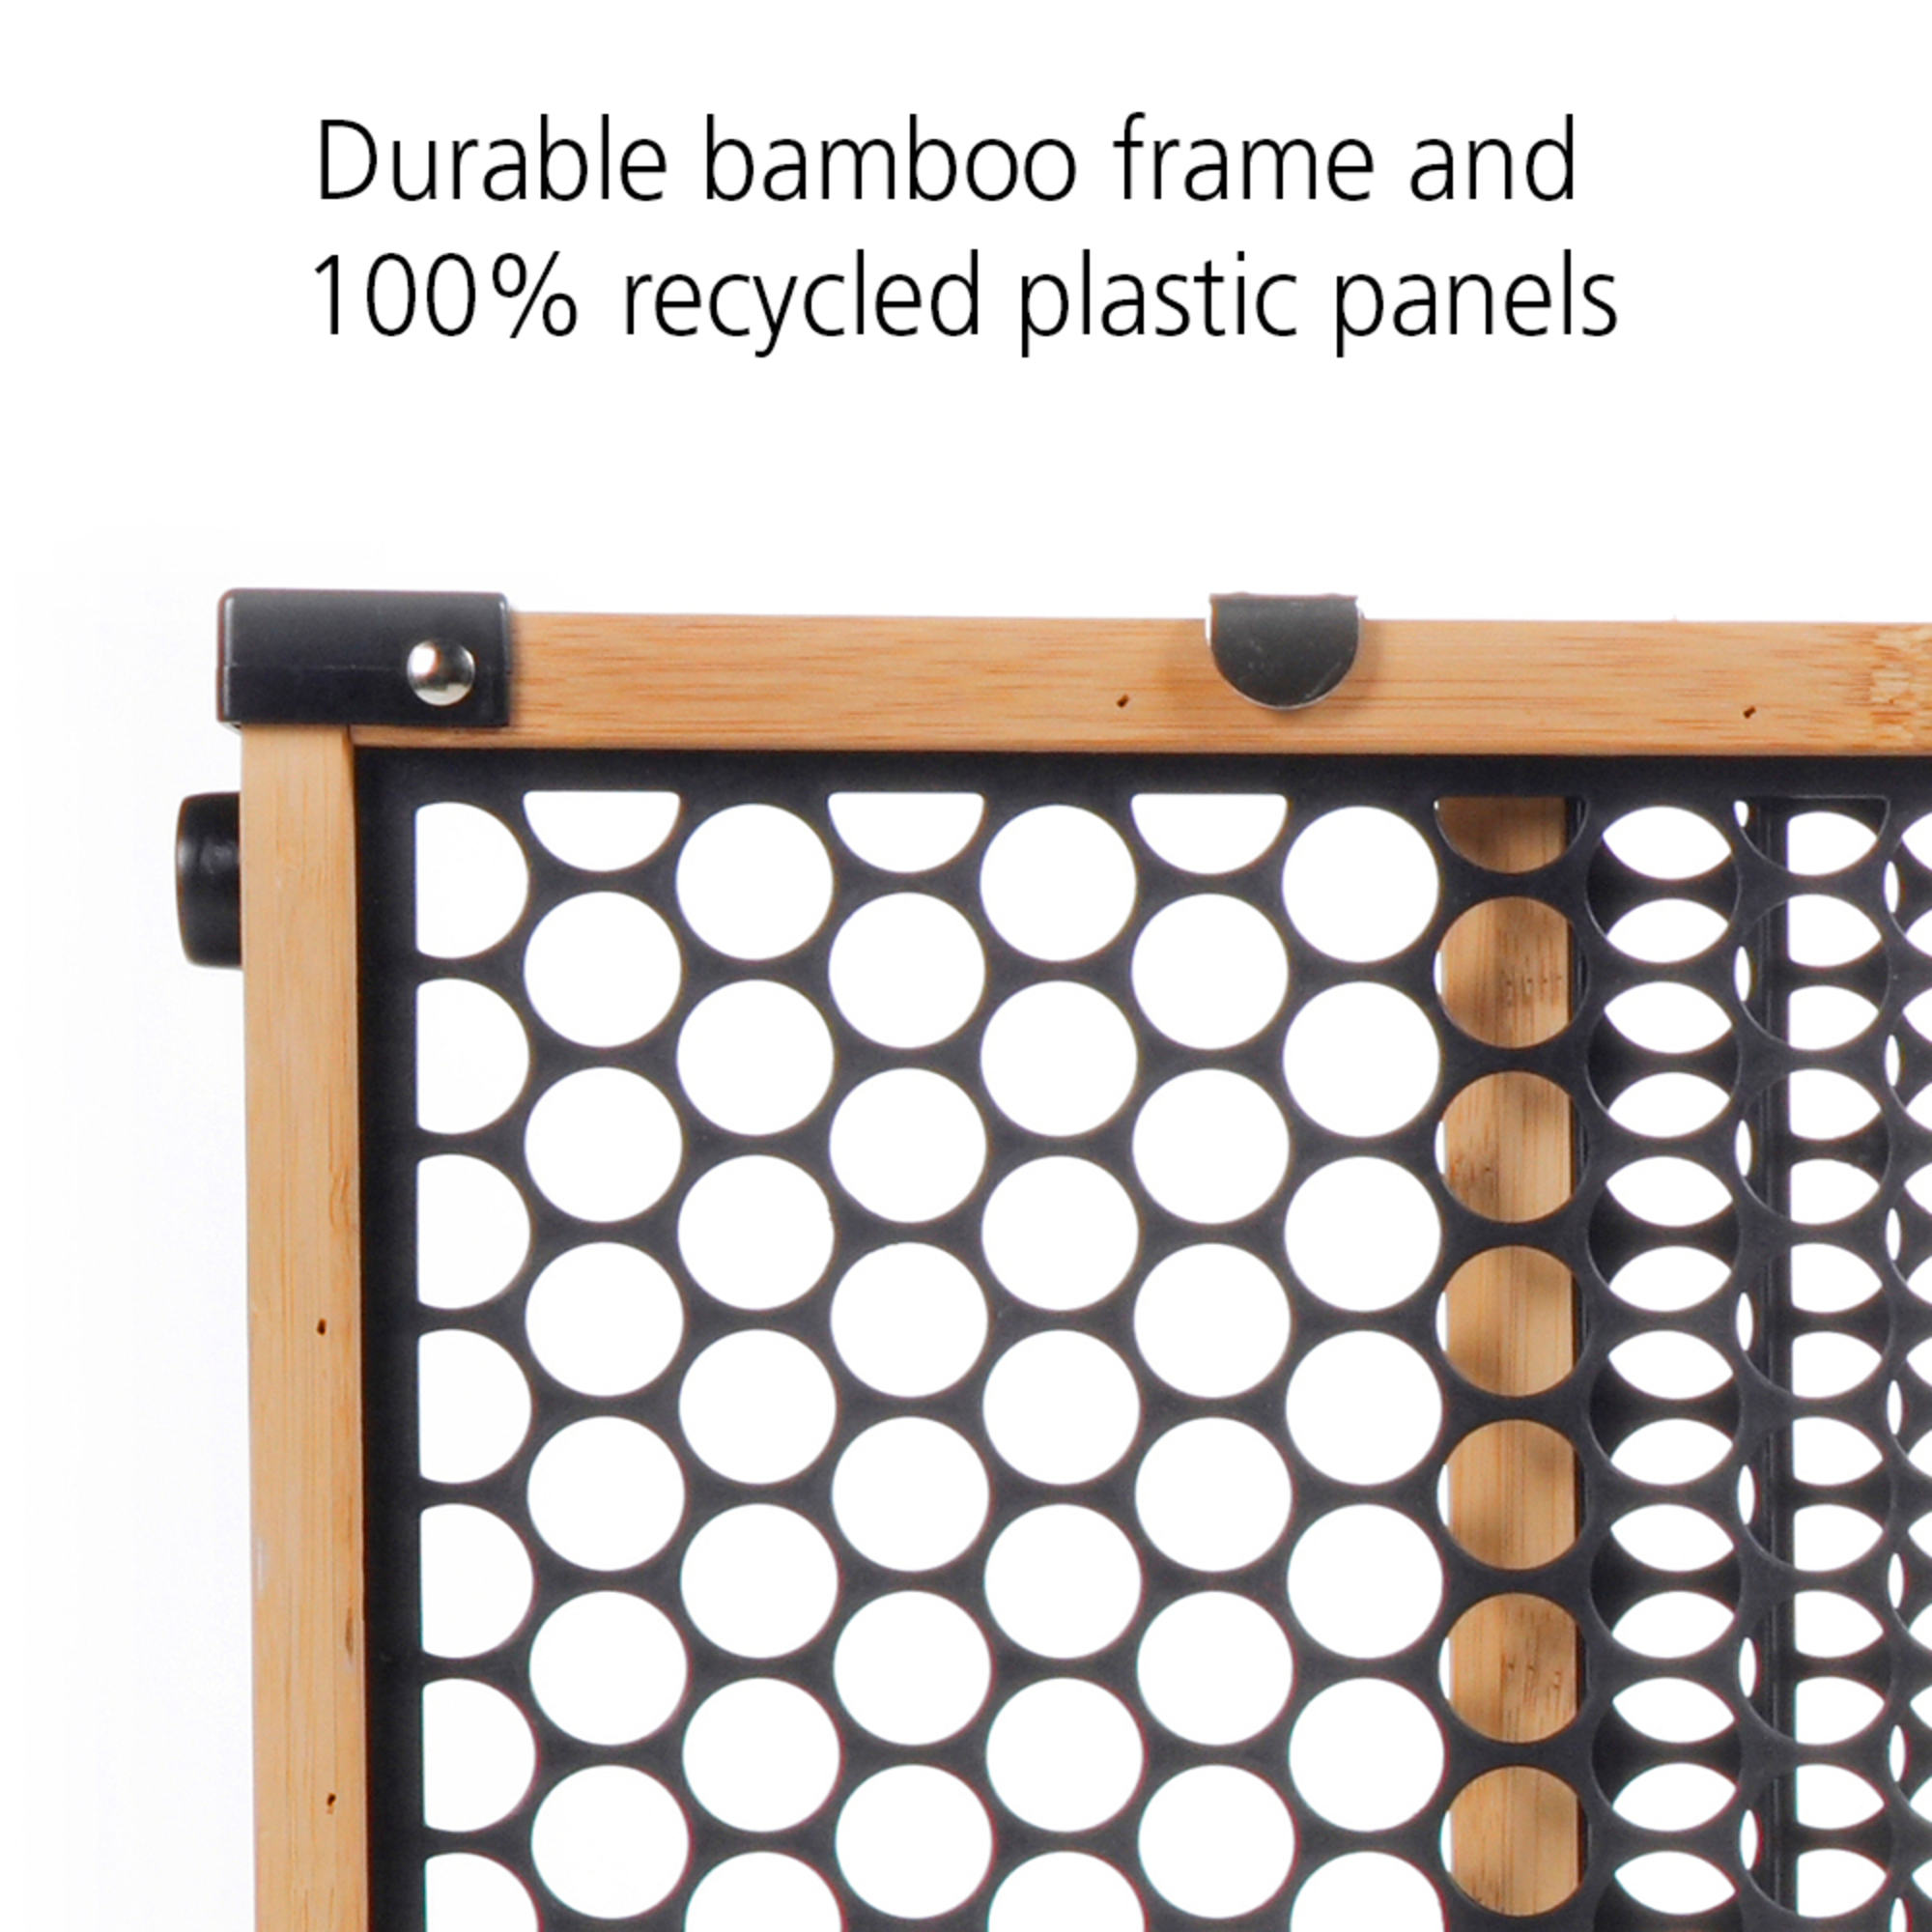 Durable bamboo frame and 100% recycled plastic panels.